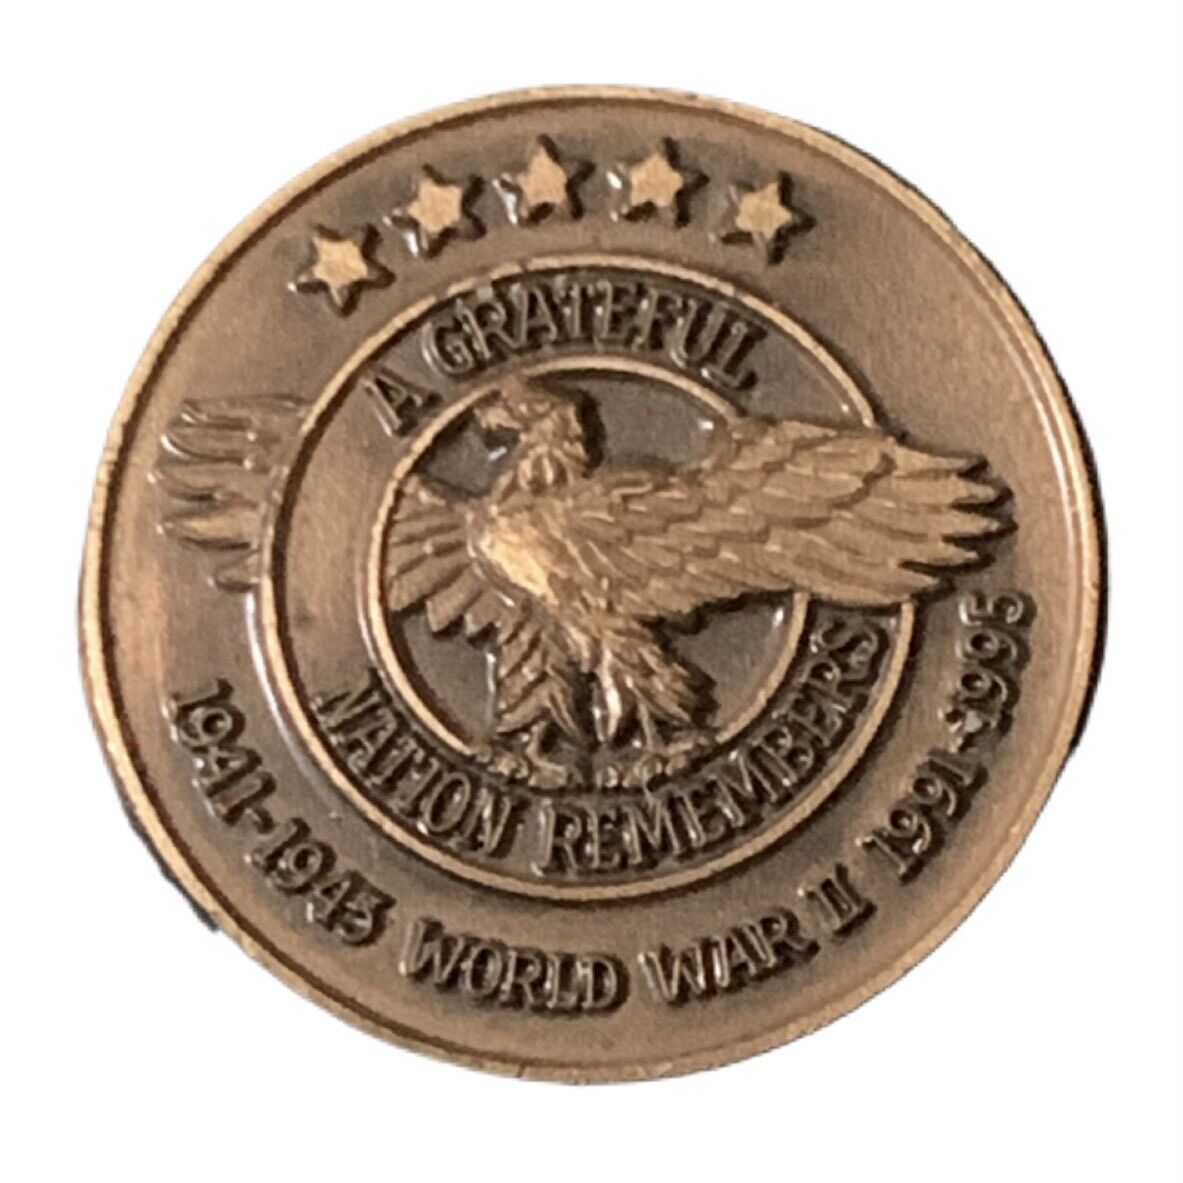 A Grateful Nation Remembers WWII 1941-1945 Commemoration Pin